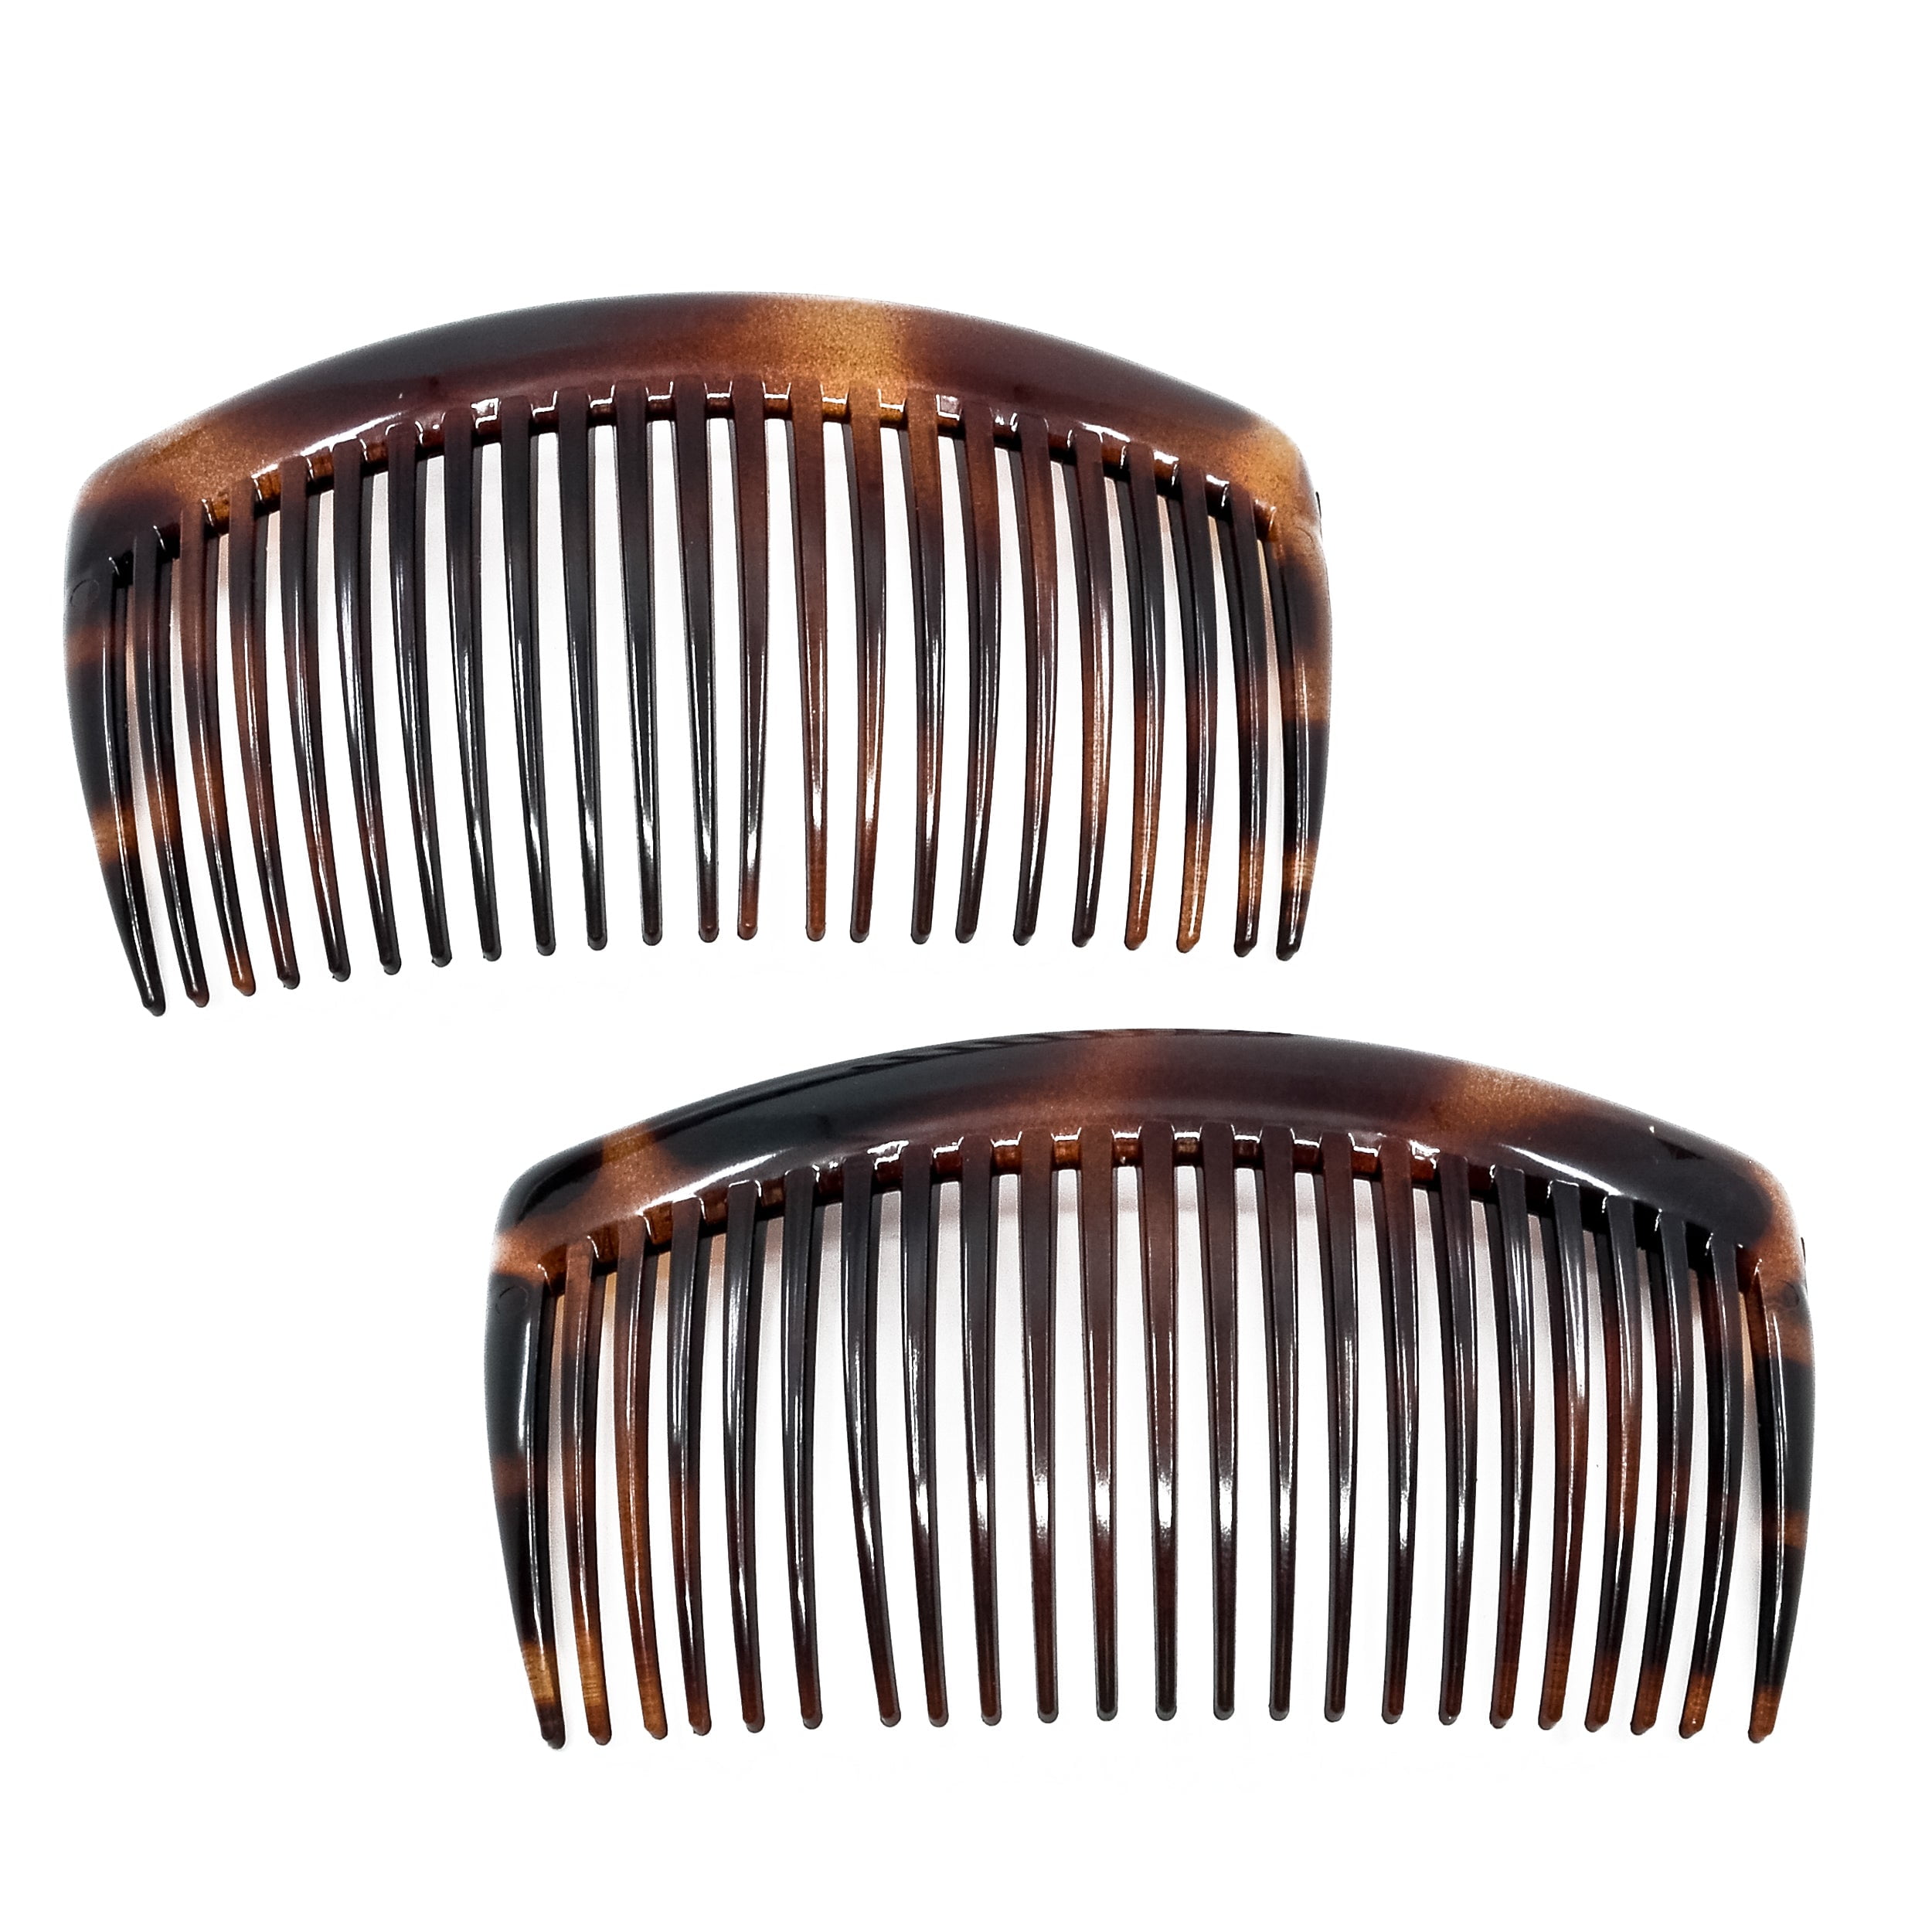 7 Centimeter Side Combs Hair Combs Pack of 4 Tortoiseshell 